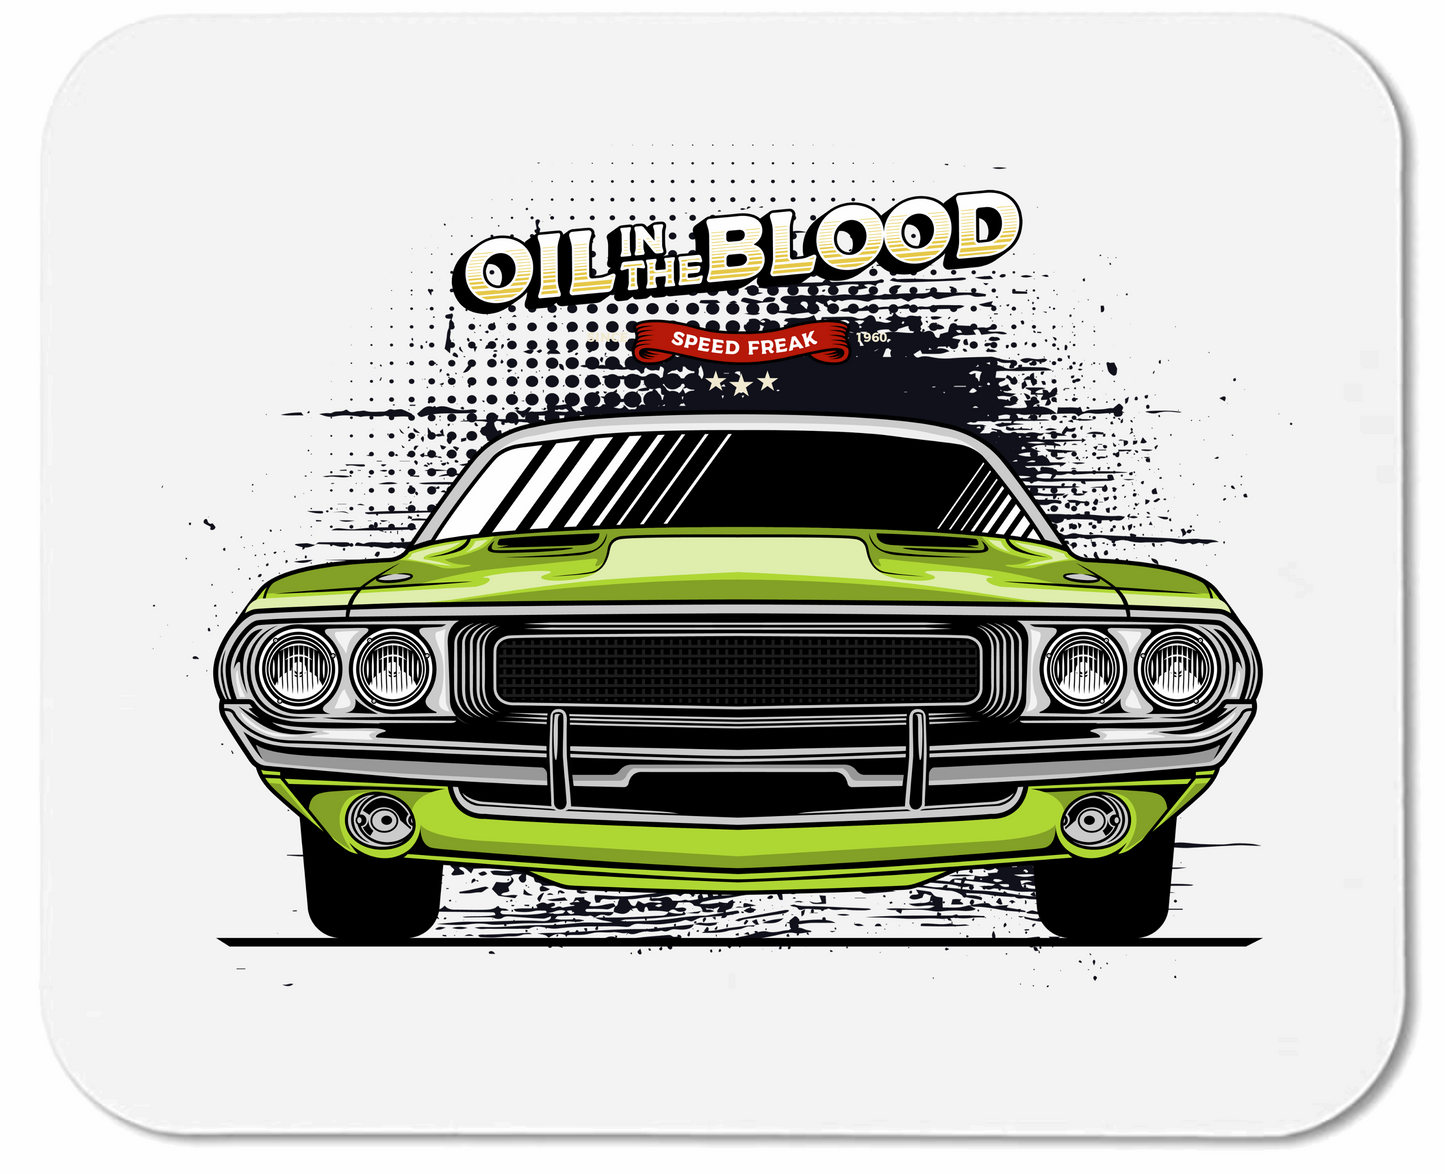 70 Dodge Challenger - Mouse Pad - 2 Sizes! - Mister Snarky's